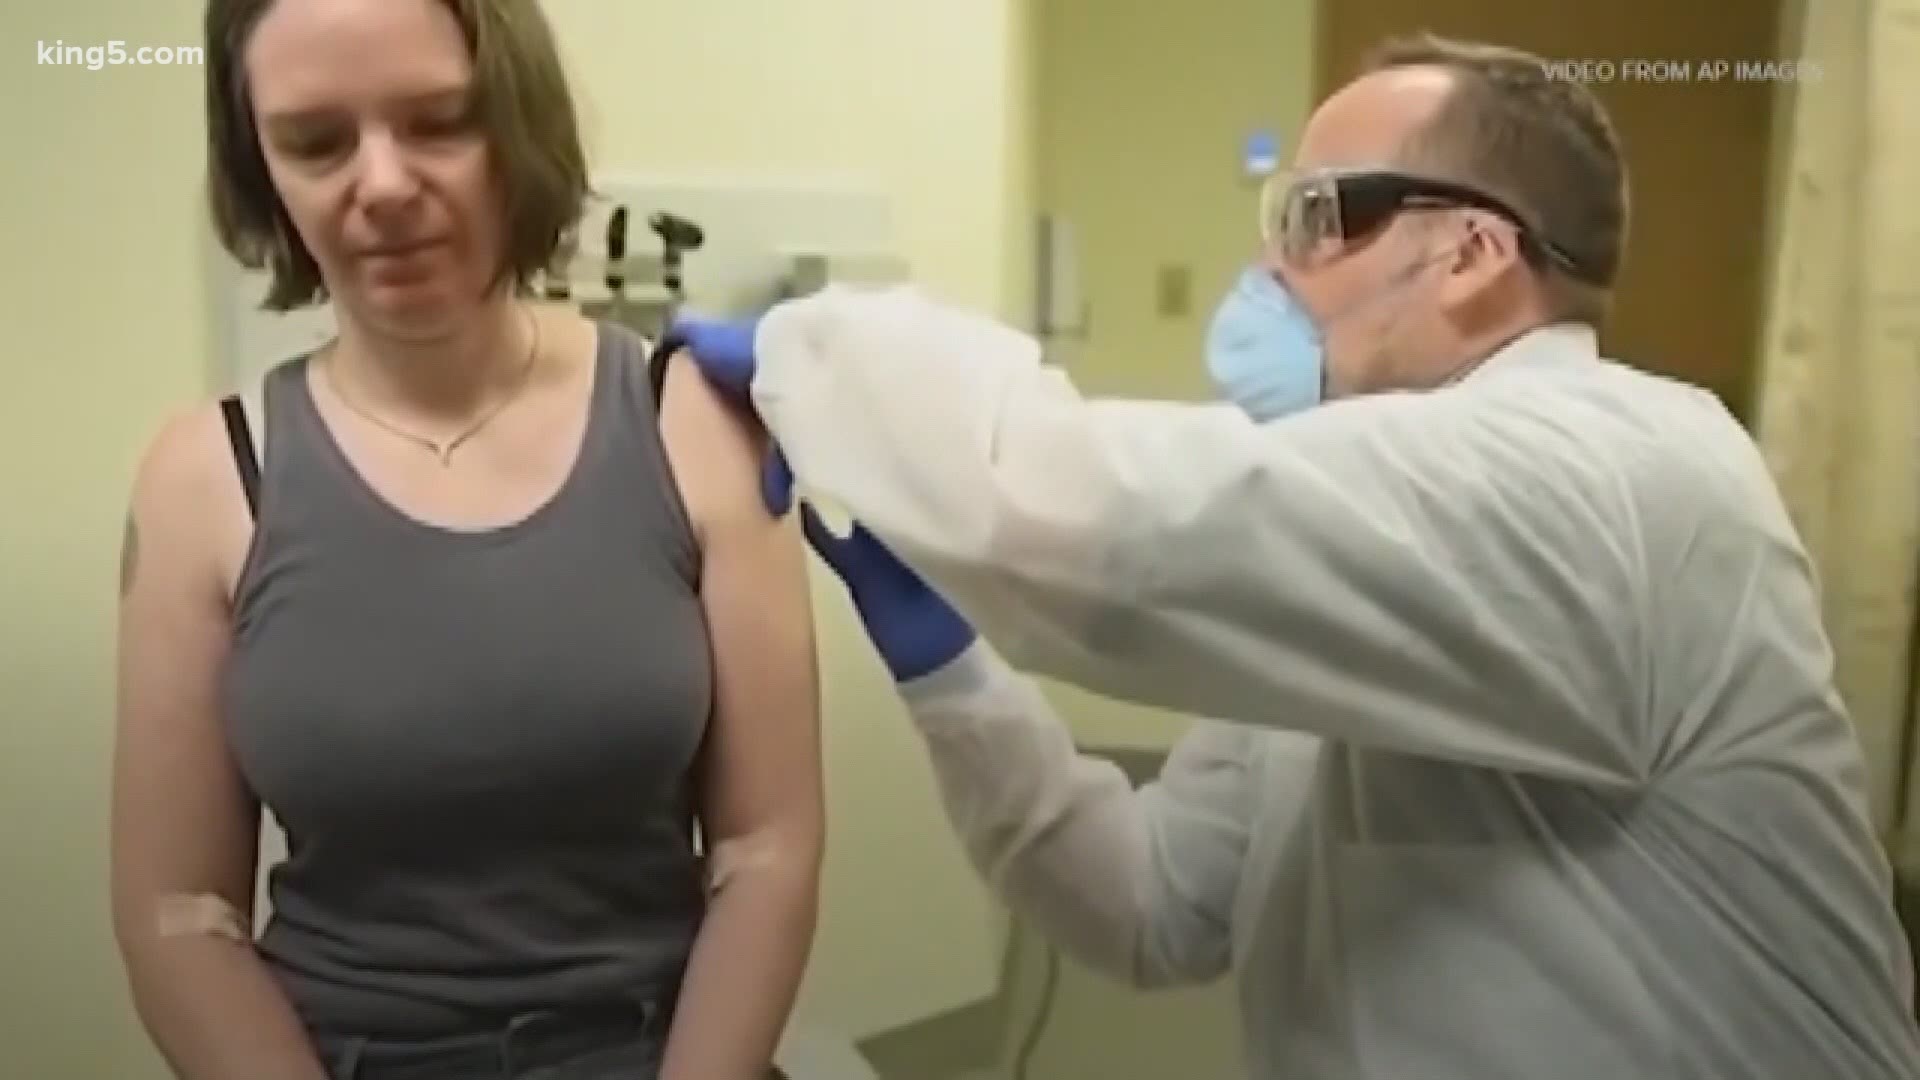 Washington state is getting ready to roll out the vaccine soon after federal approval, but it could take months to get everyone immunized.